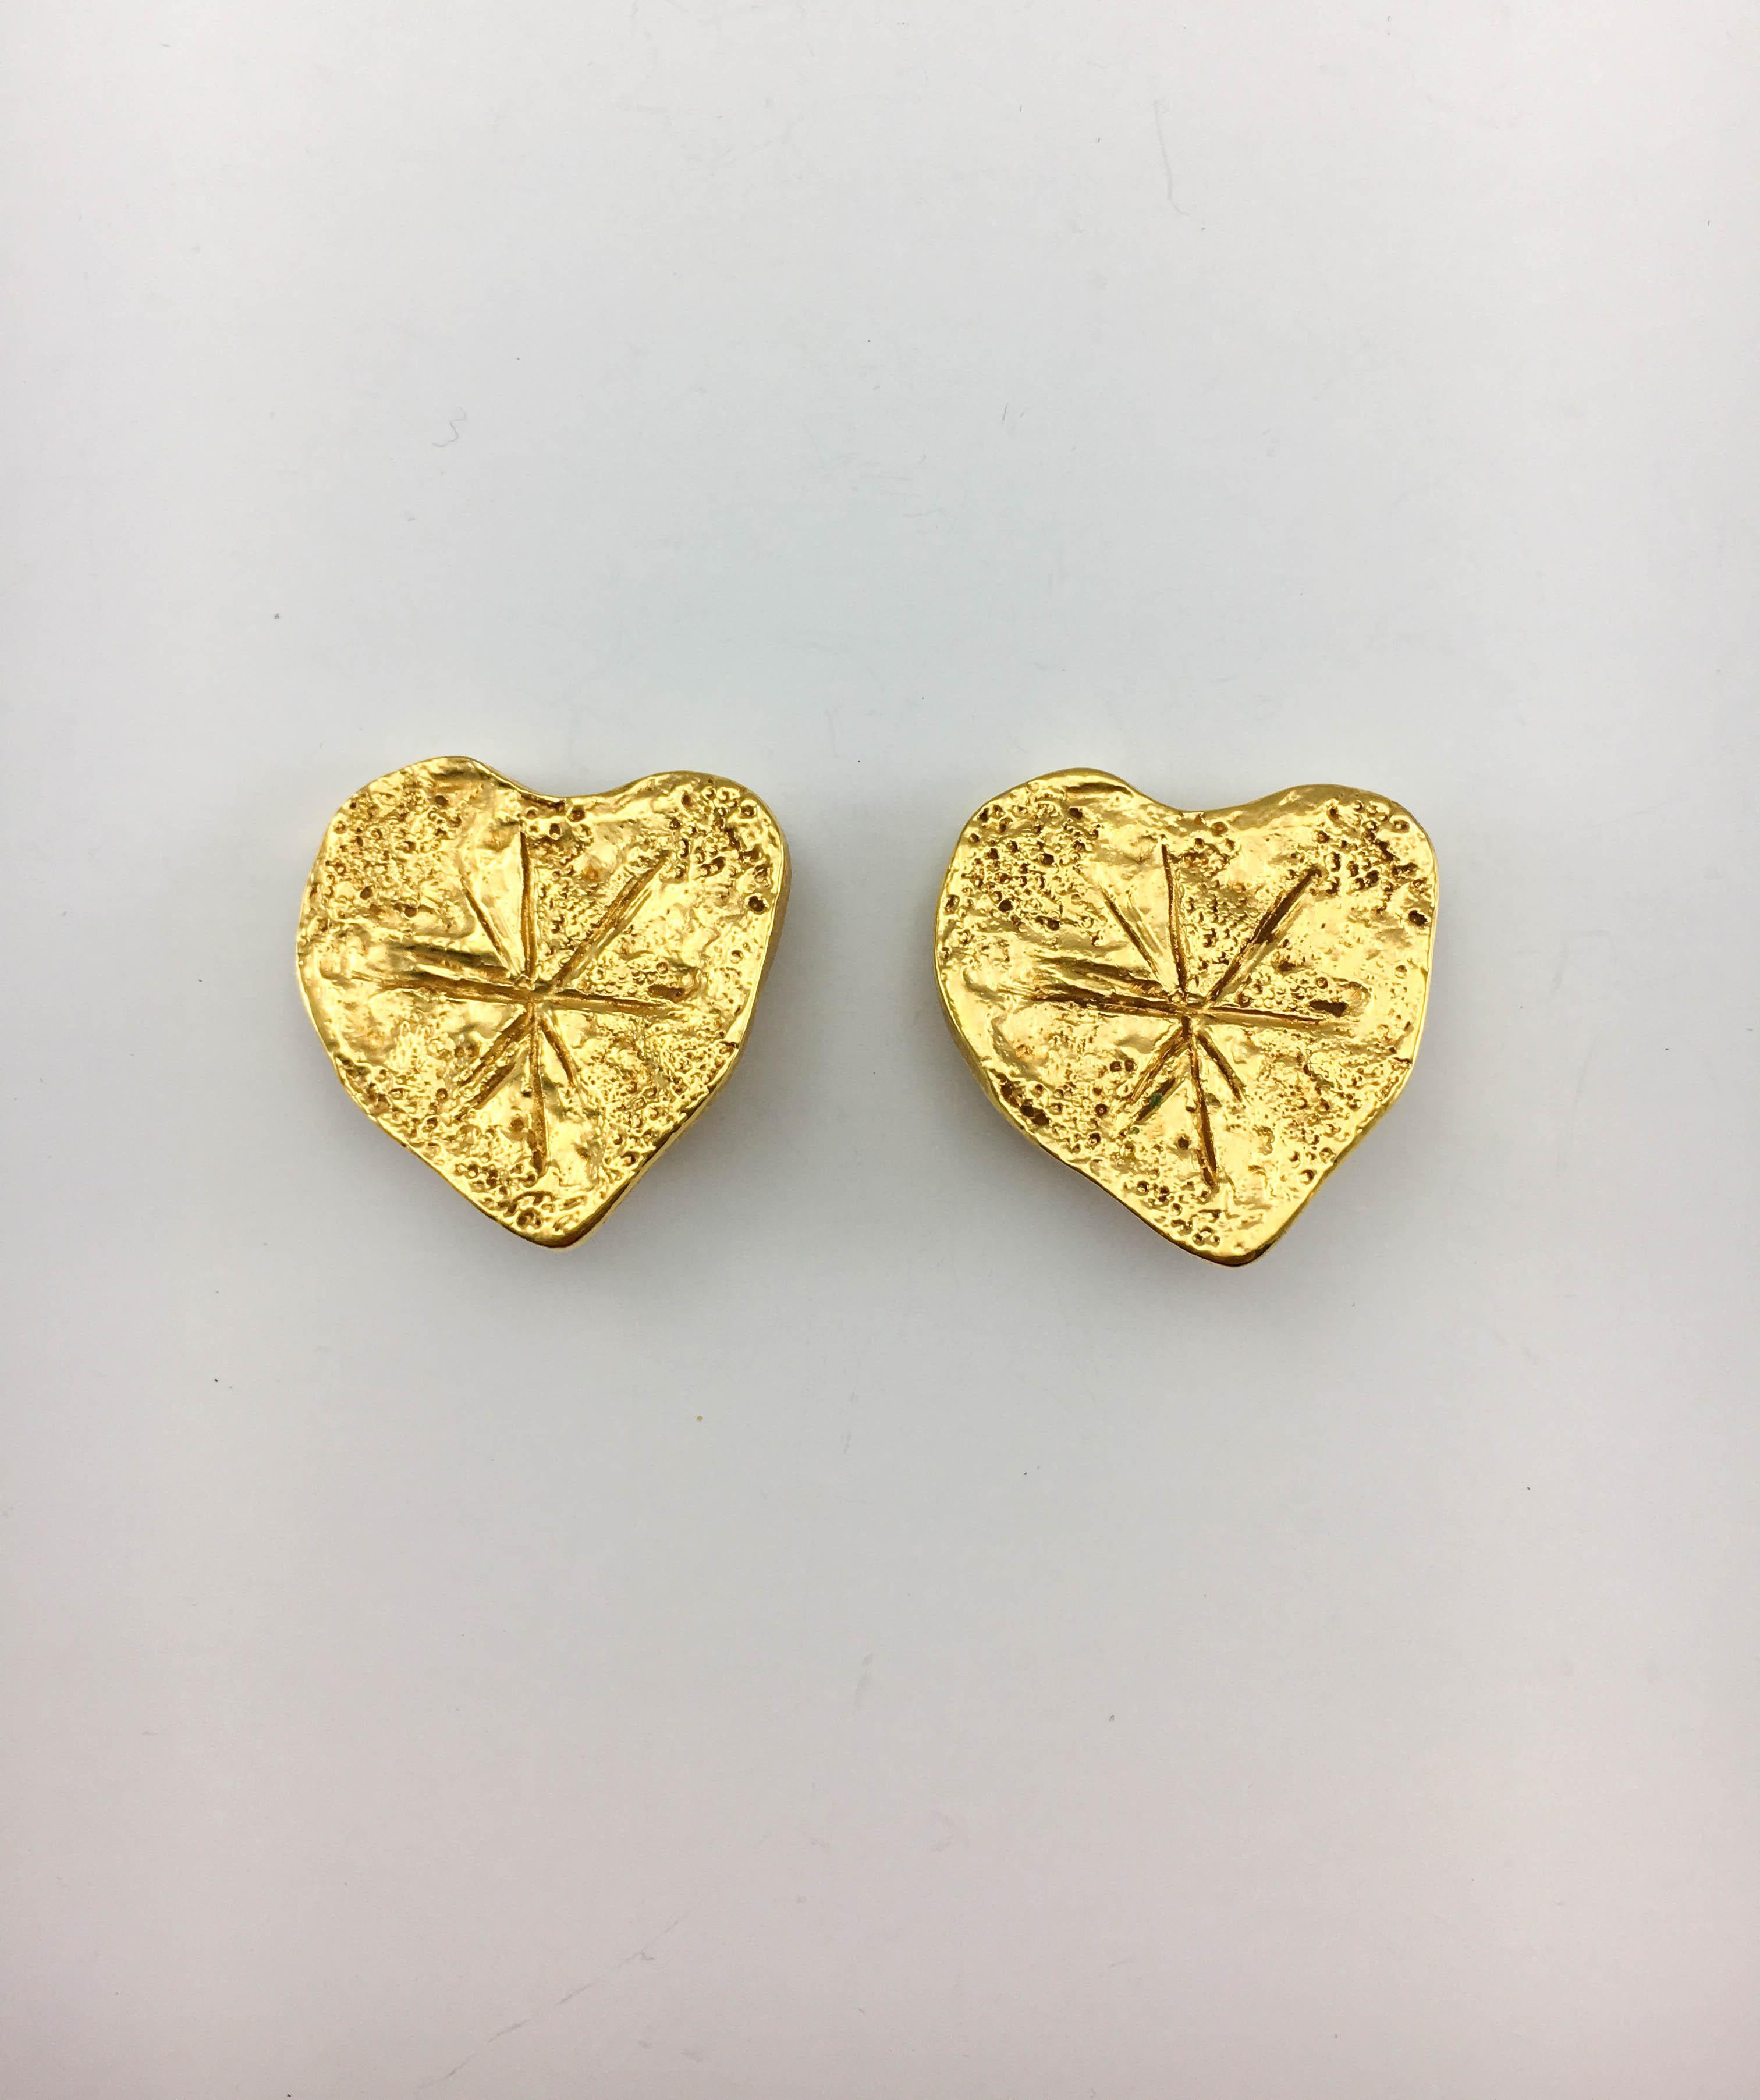 Vintage Christian Lacroix Gold-Plated Texturized Heart Clip-On Earrings. These striking earrings by Christian Lacroix by Goossens were created in 1994. Heart-shaped and crafted in gold-plated metal, the pieces are texturized, giving them an organic,